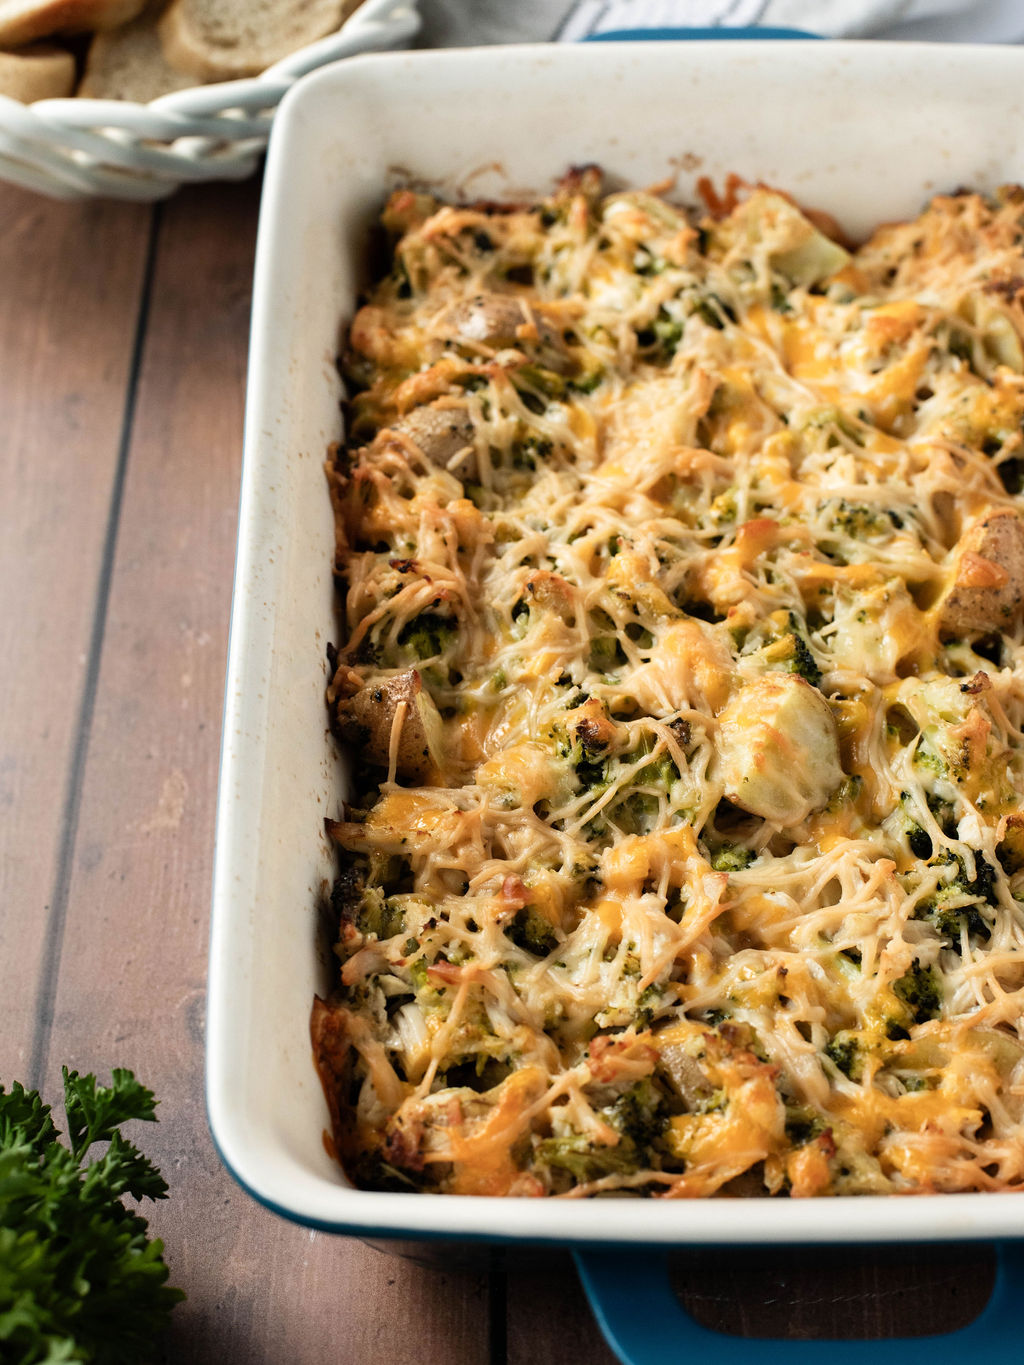 a chicken, broccoli, potato casserole with cheese melted on top.